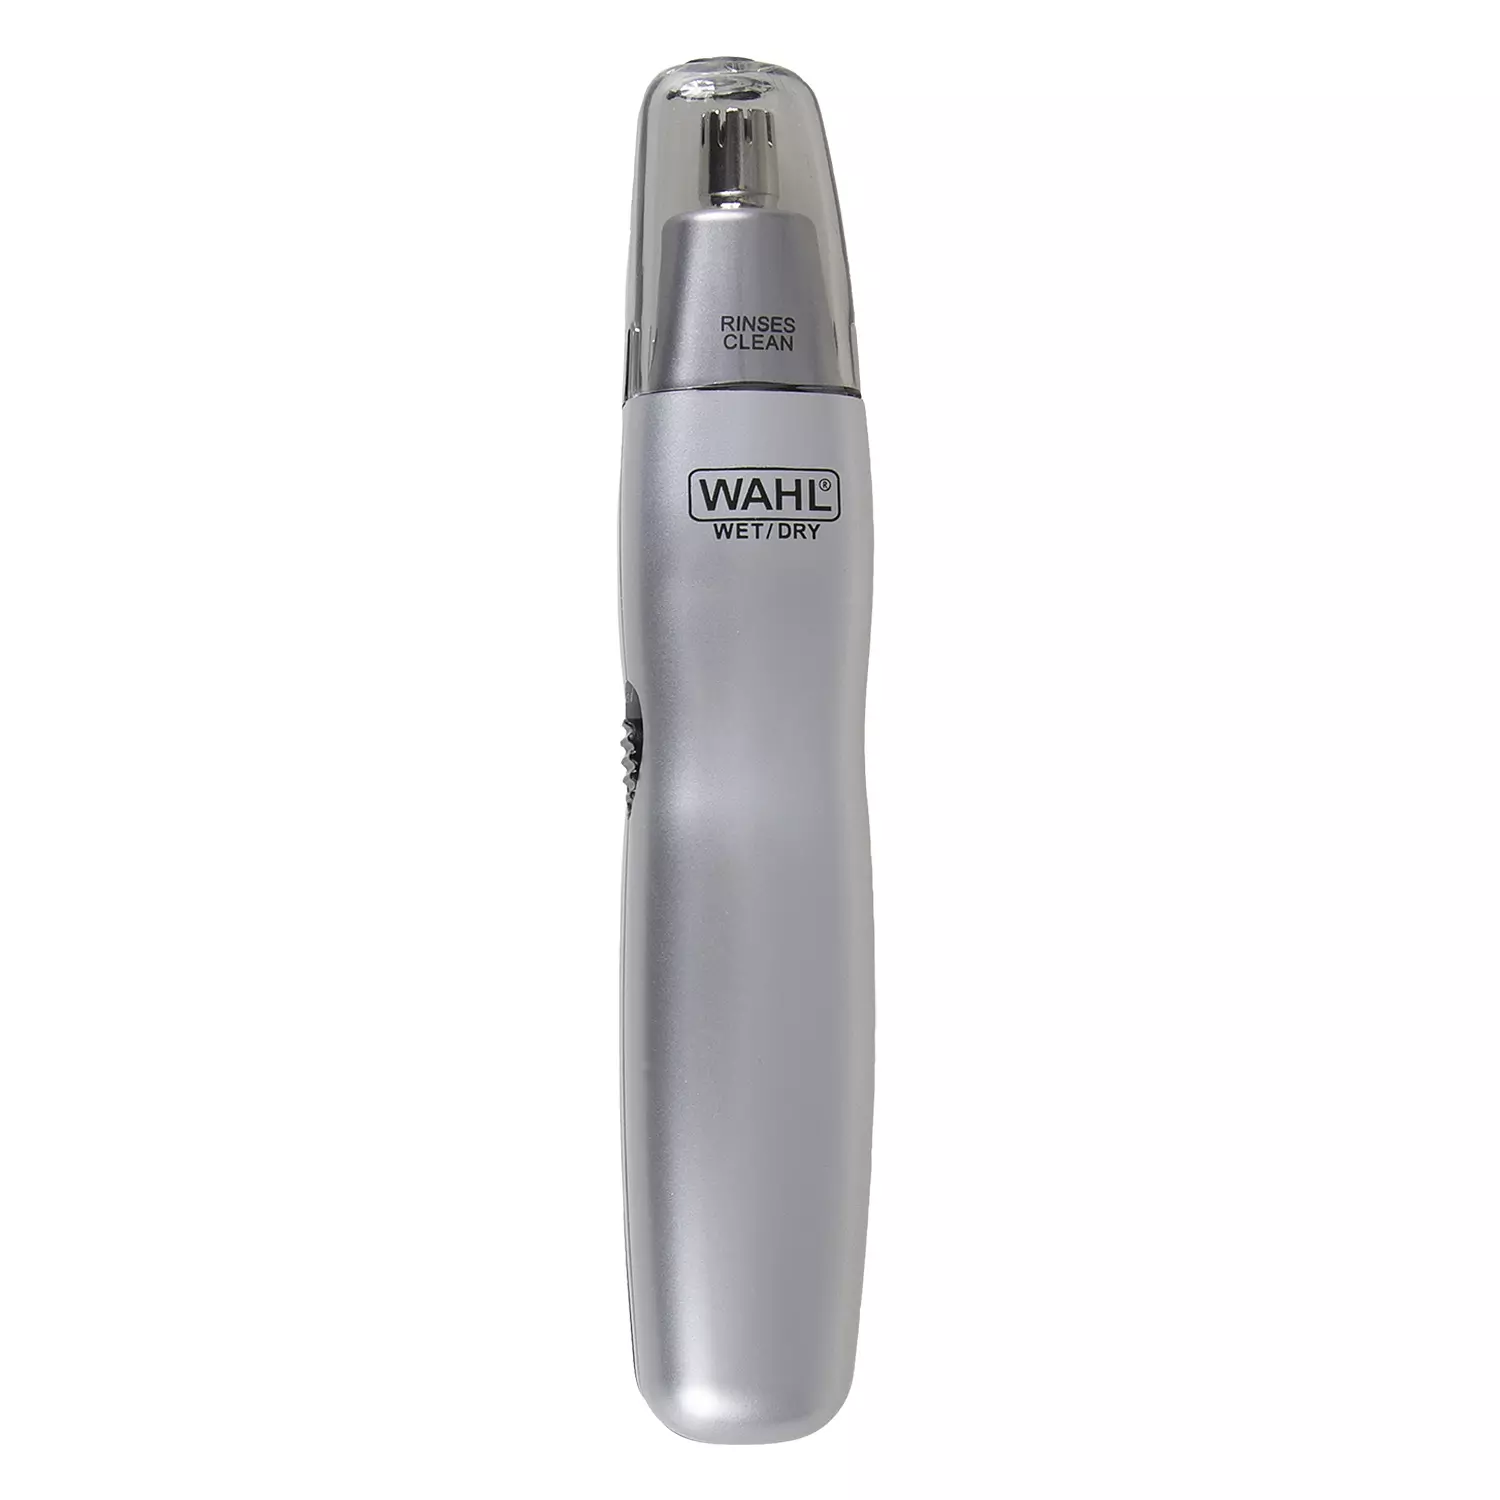 Whal - Ear, nose and brow wet/dry battery trimmer